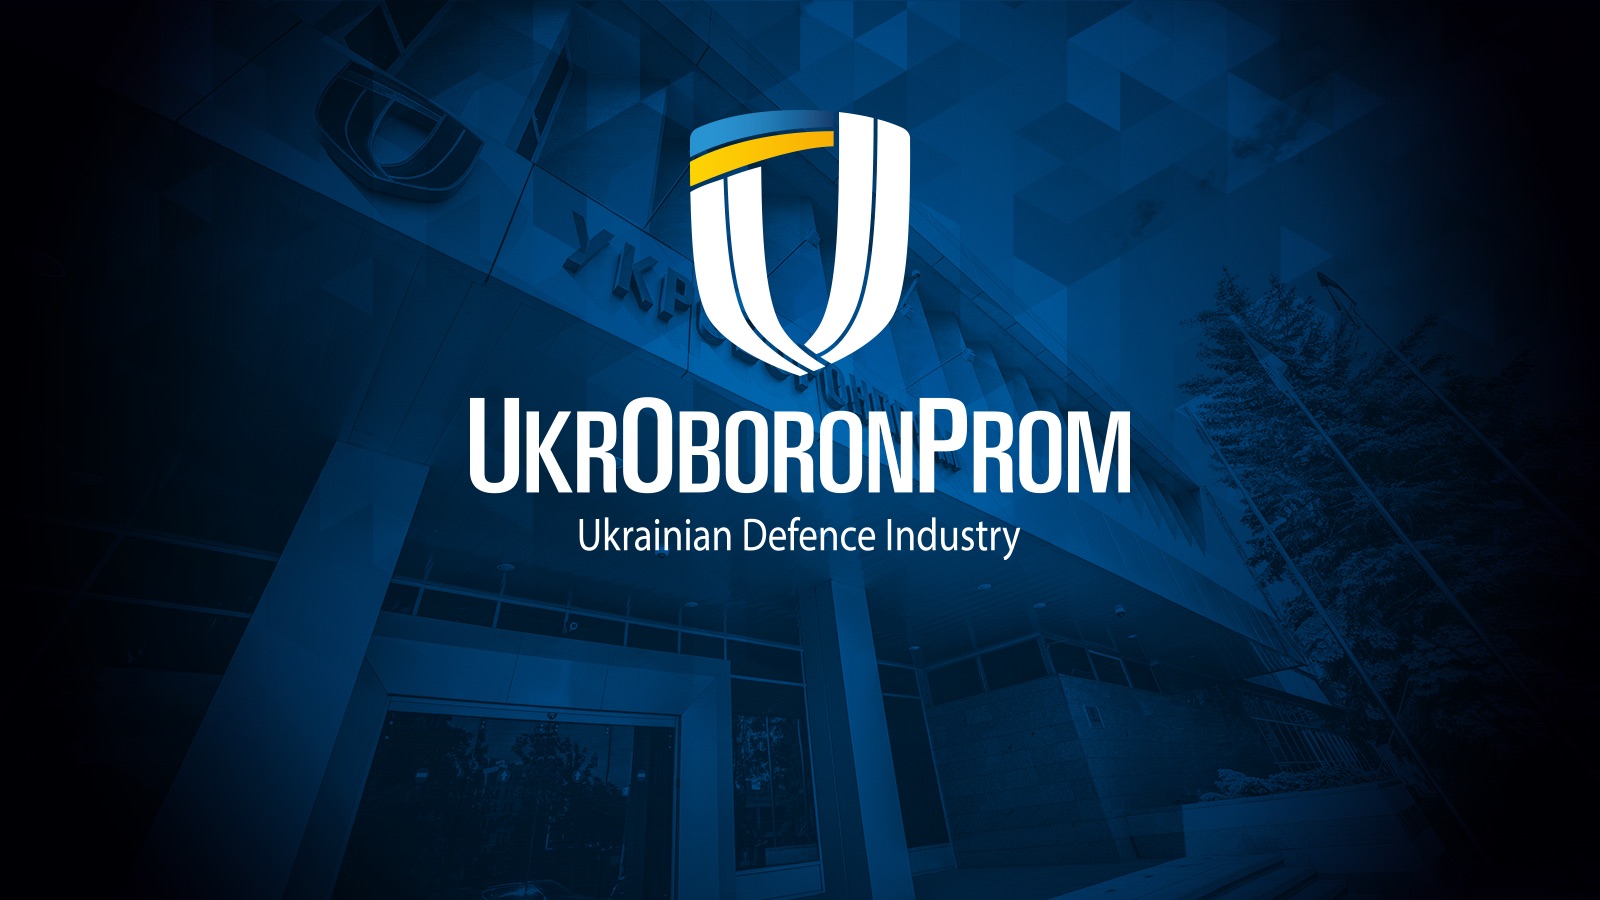 Information from Ukroboronprom as of the evening of February 26